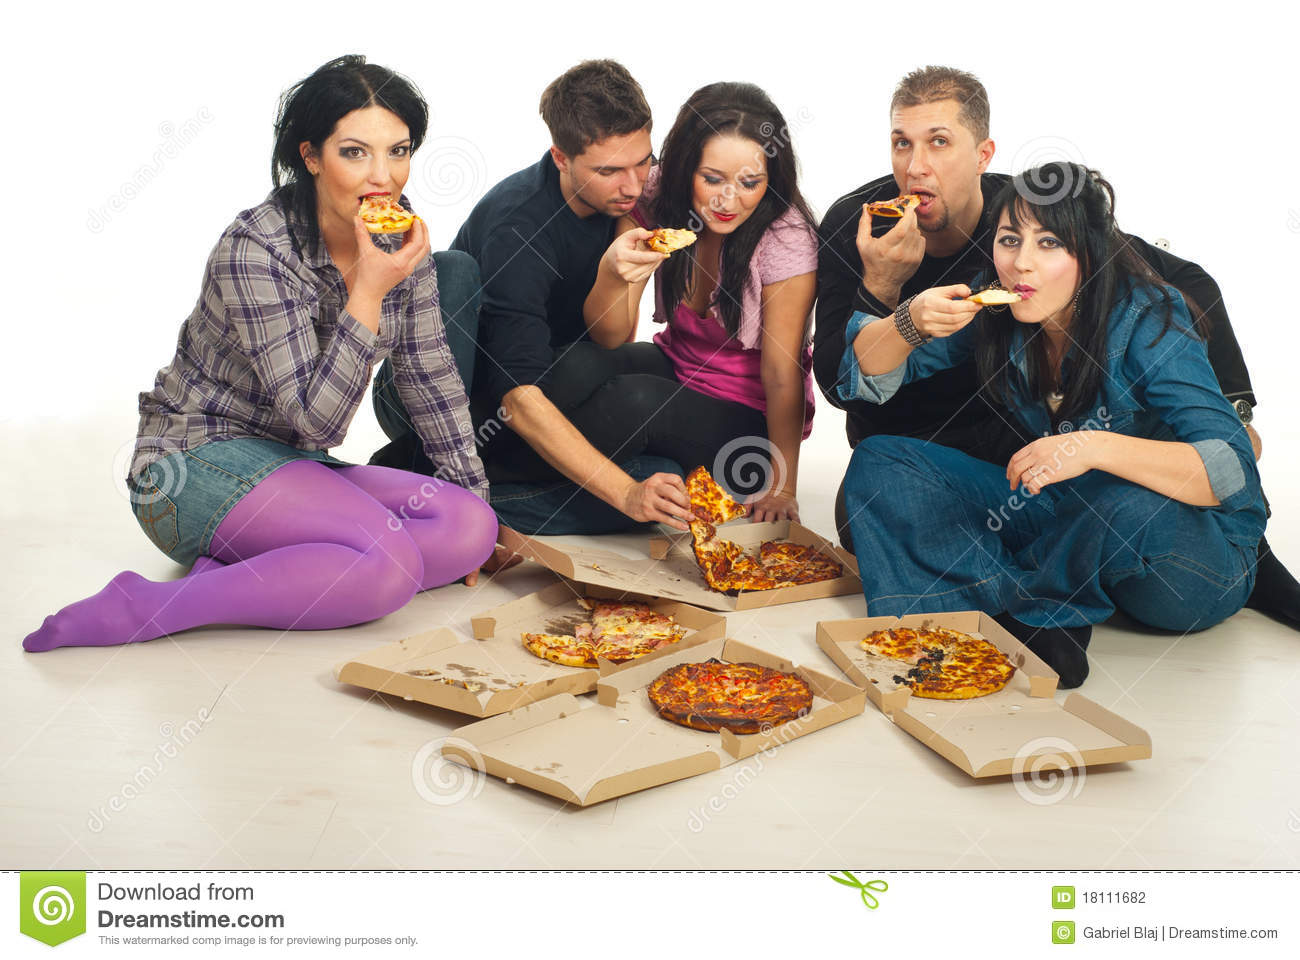 Group Of Five Friends Eating Delivery Pizza And Sitting Together On